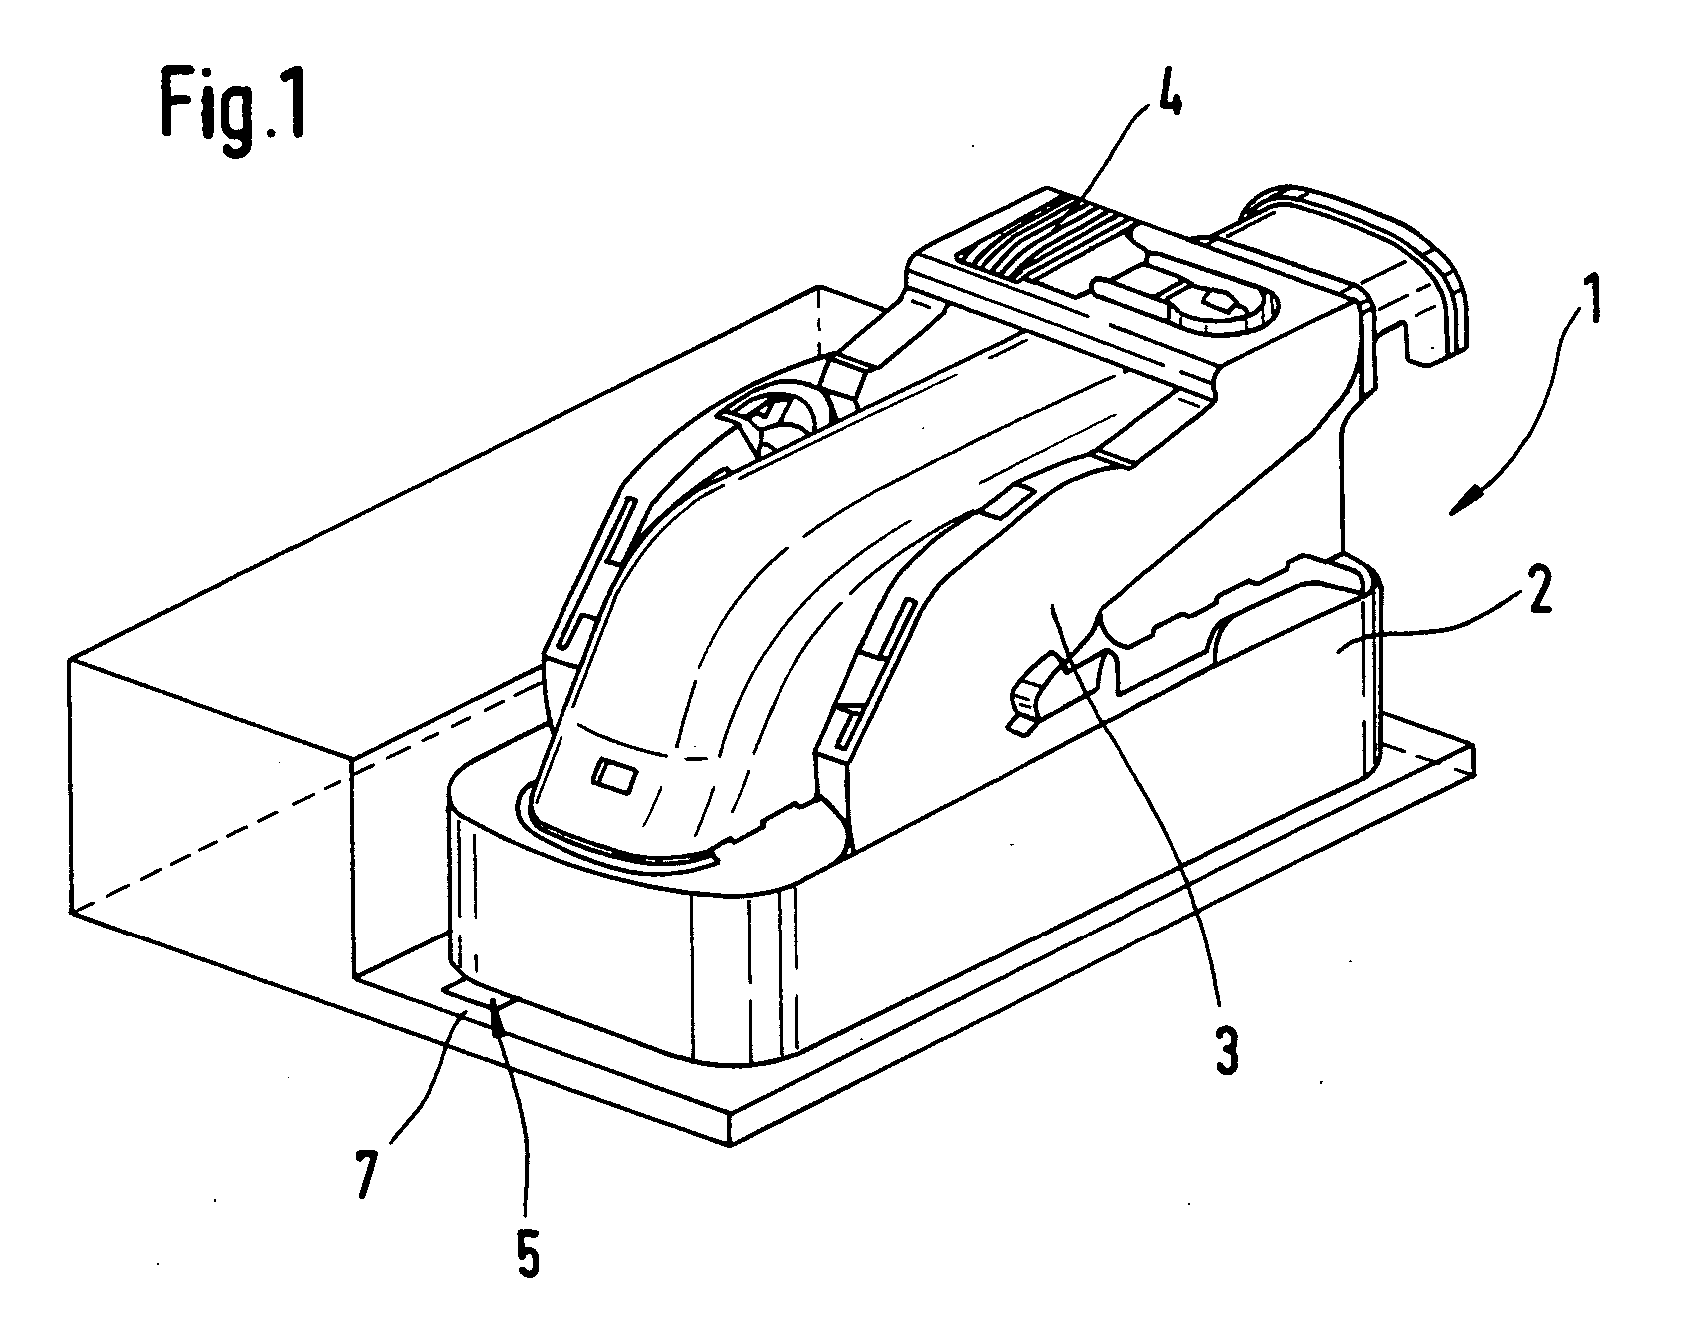 Plug connector position control for checking the complete and proper execution of an electrical plug connection between a plug connector and a mating connector